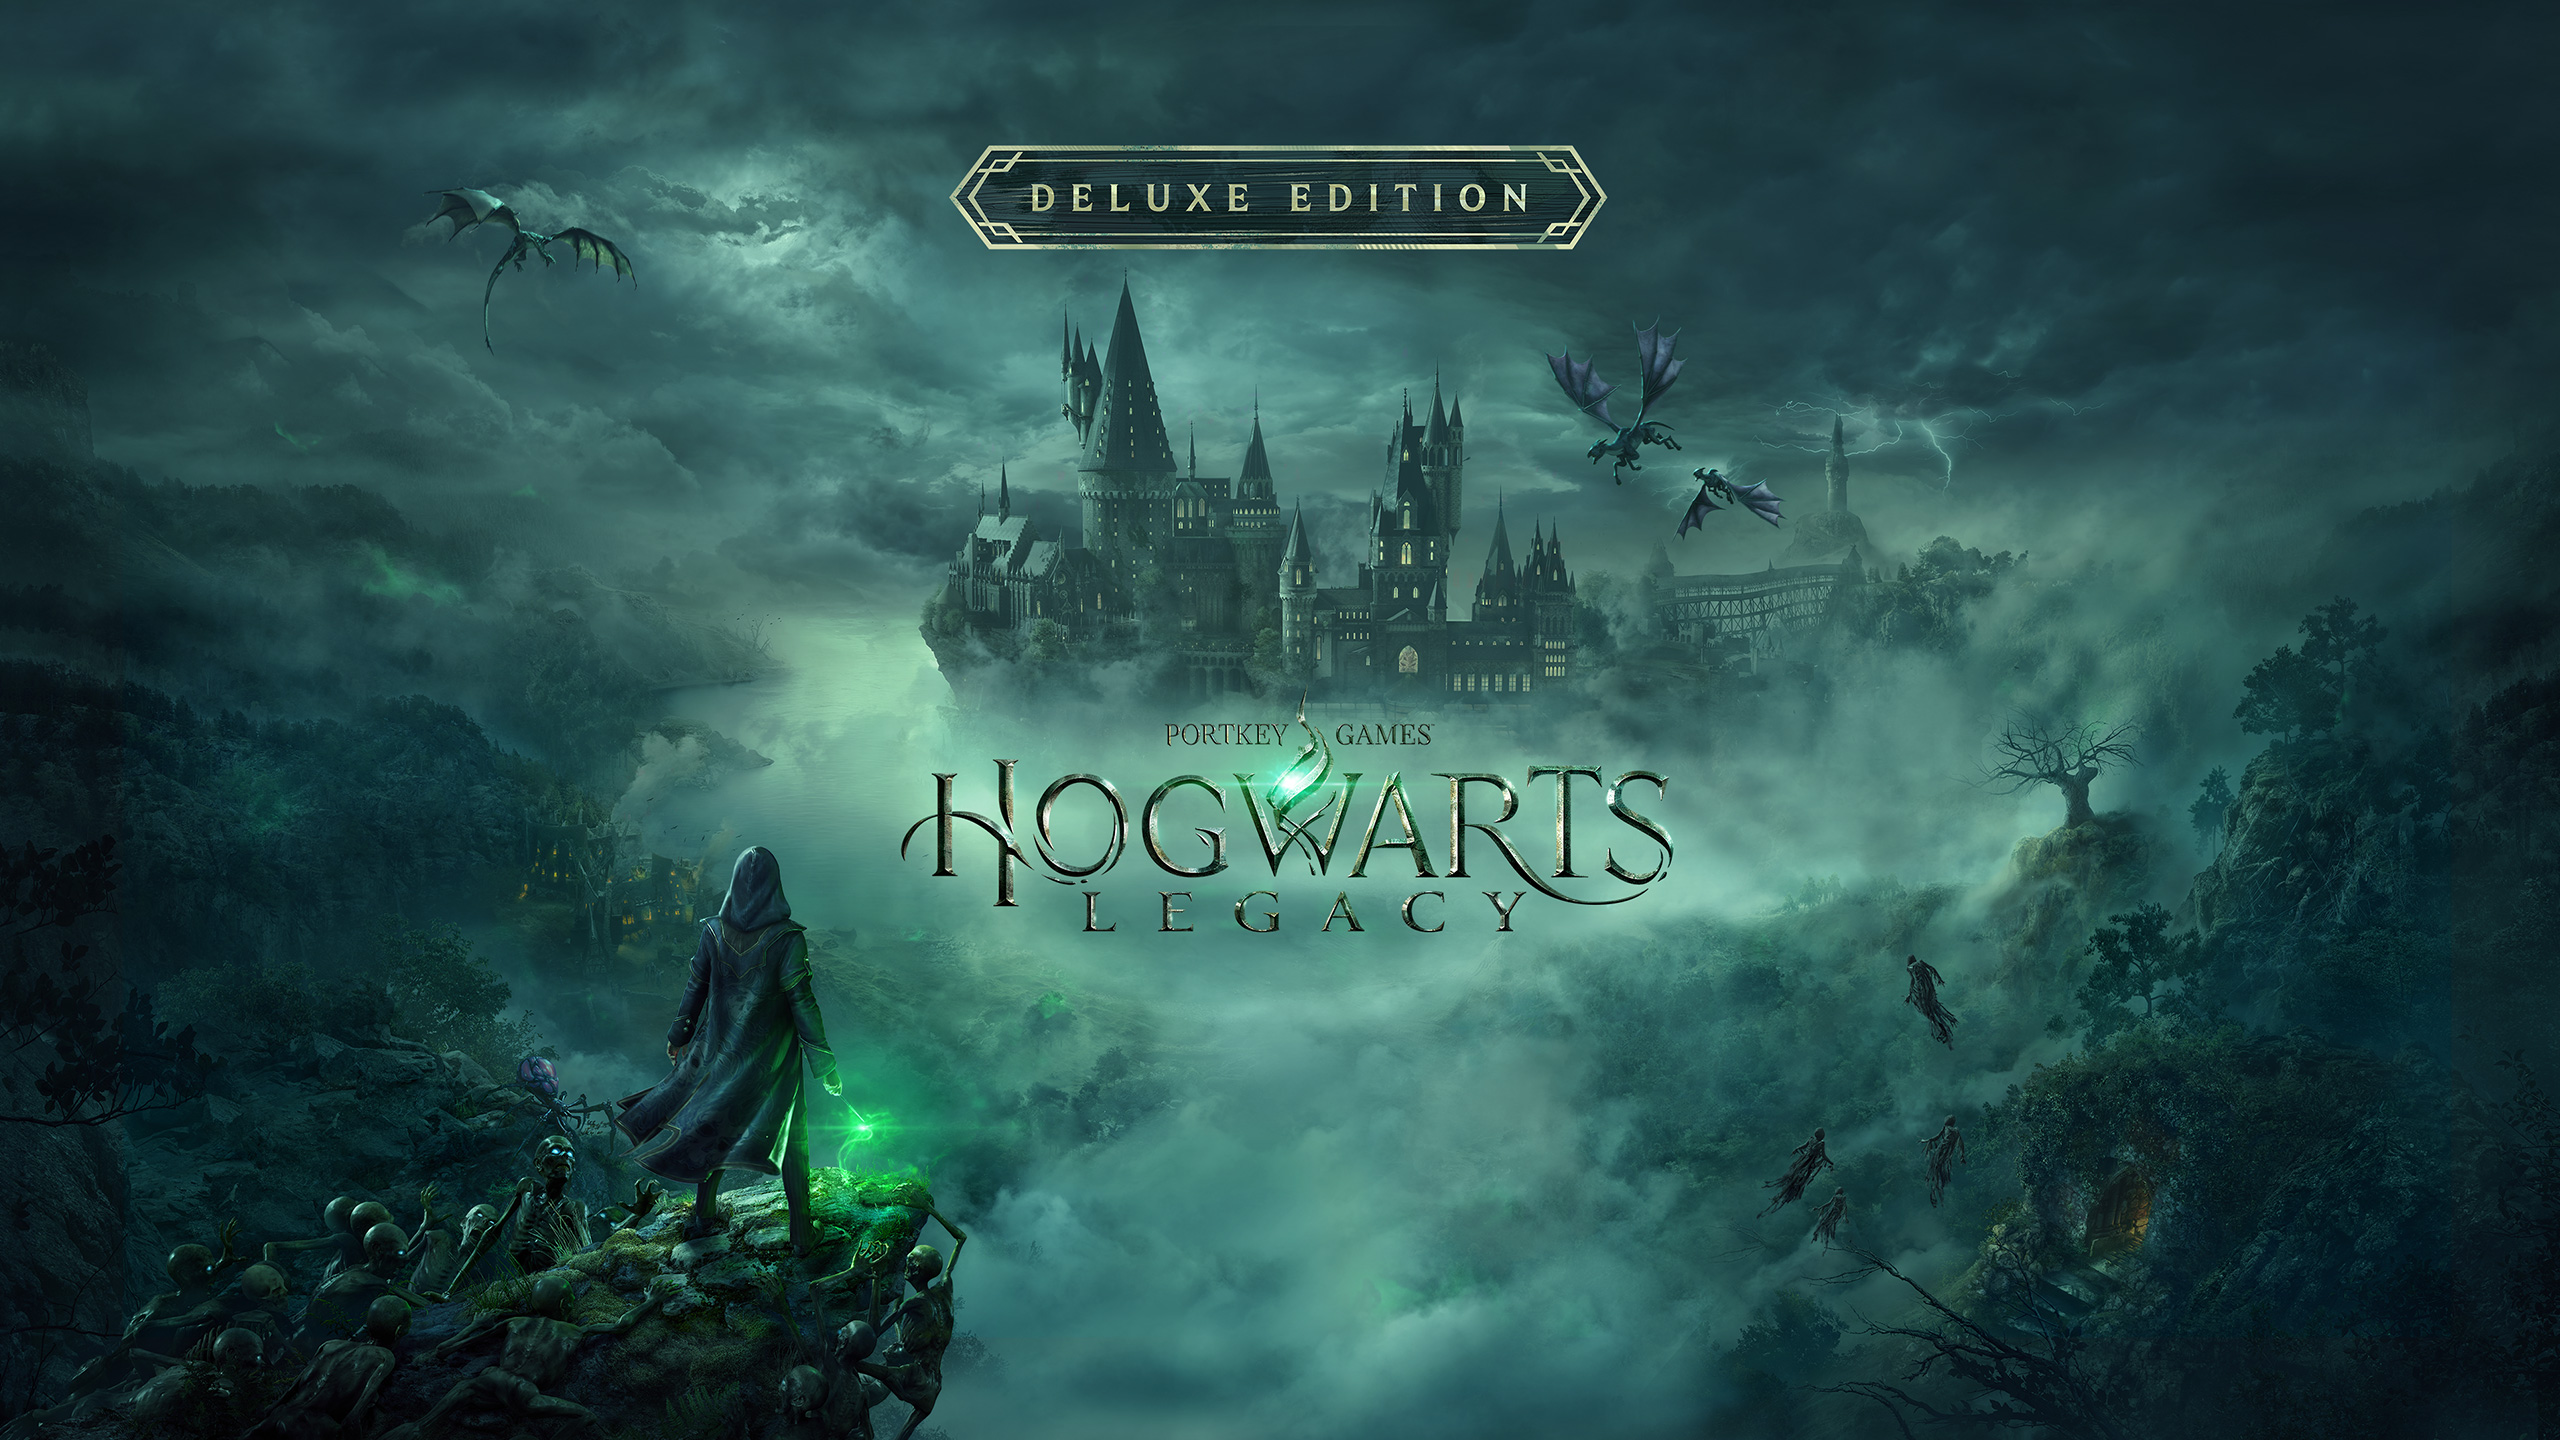 Hogwarts Legacy: Digital Deluxe Edition. Download and Buy Today Games Store